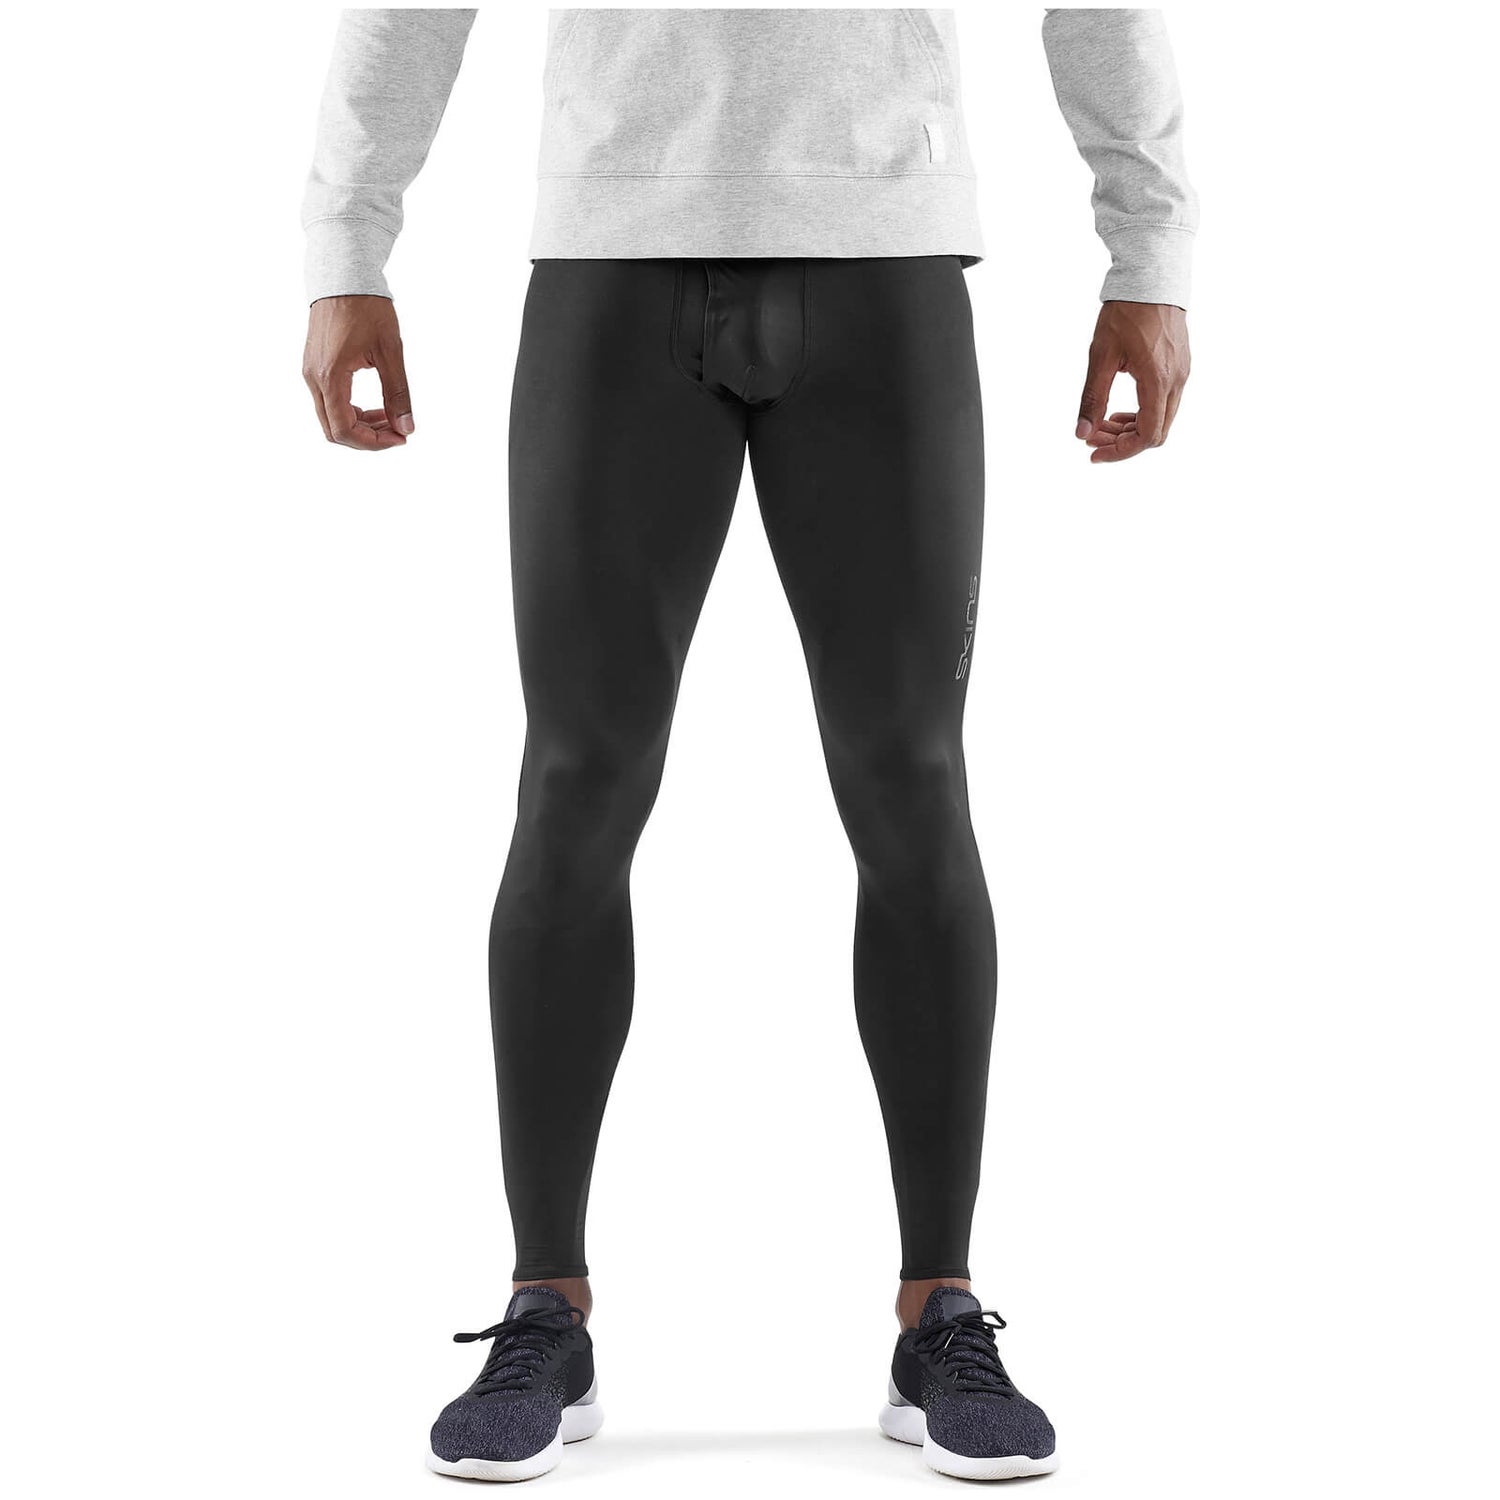 Skins DNAmic Sport Recovery Tights - Black